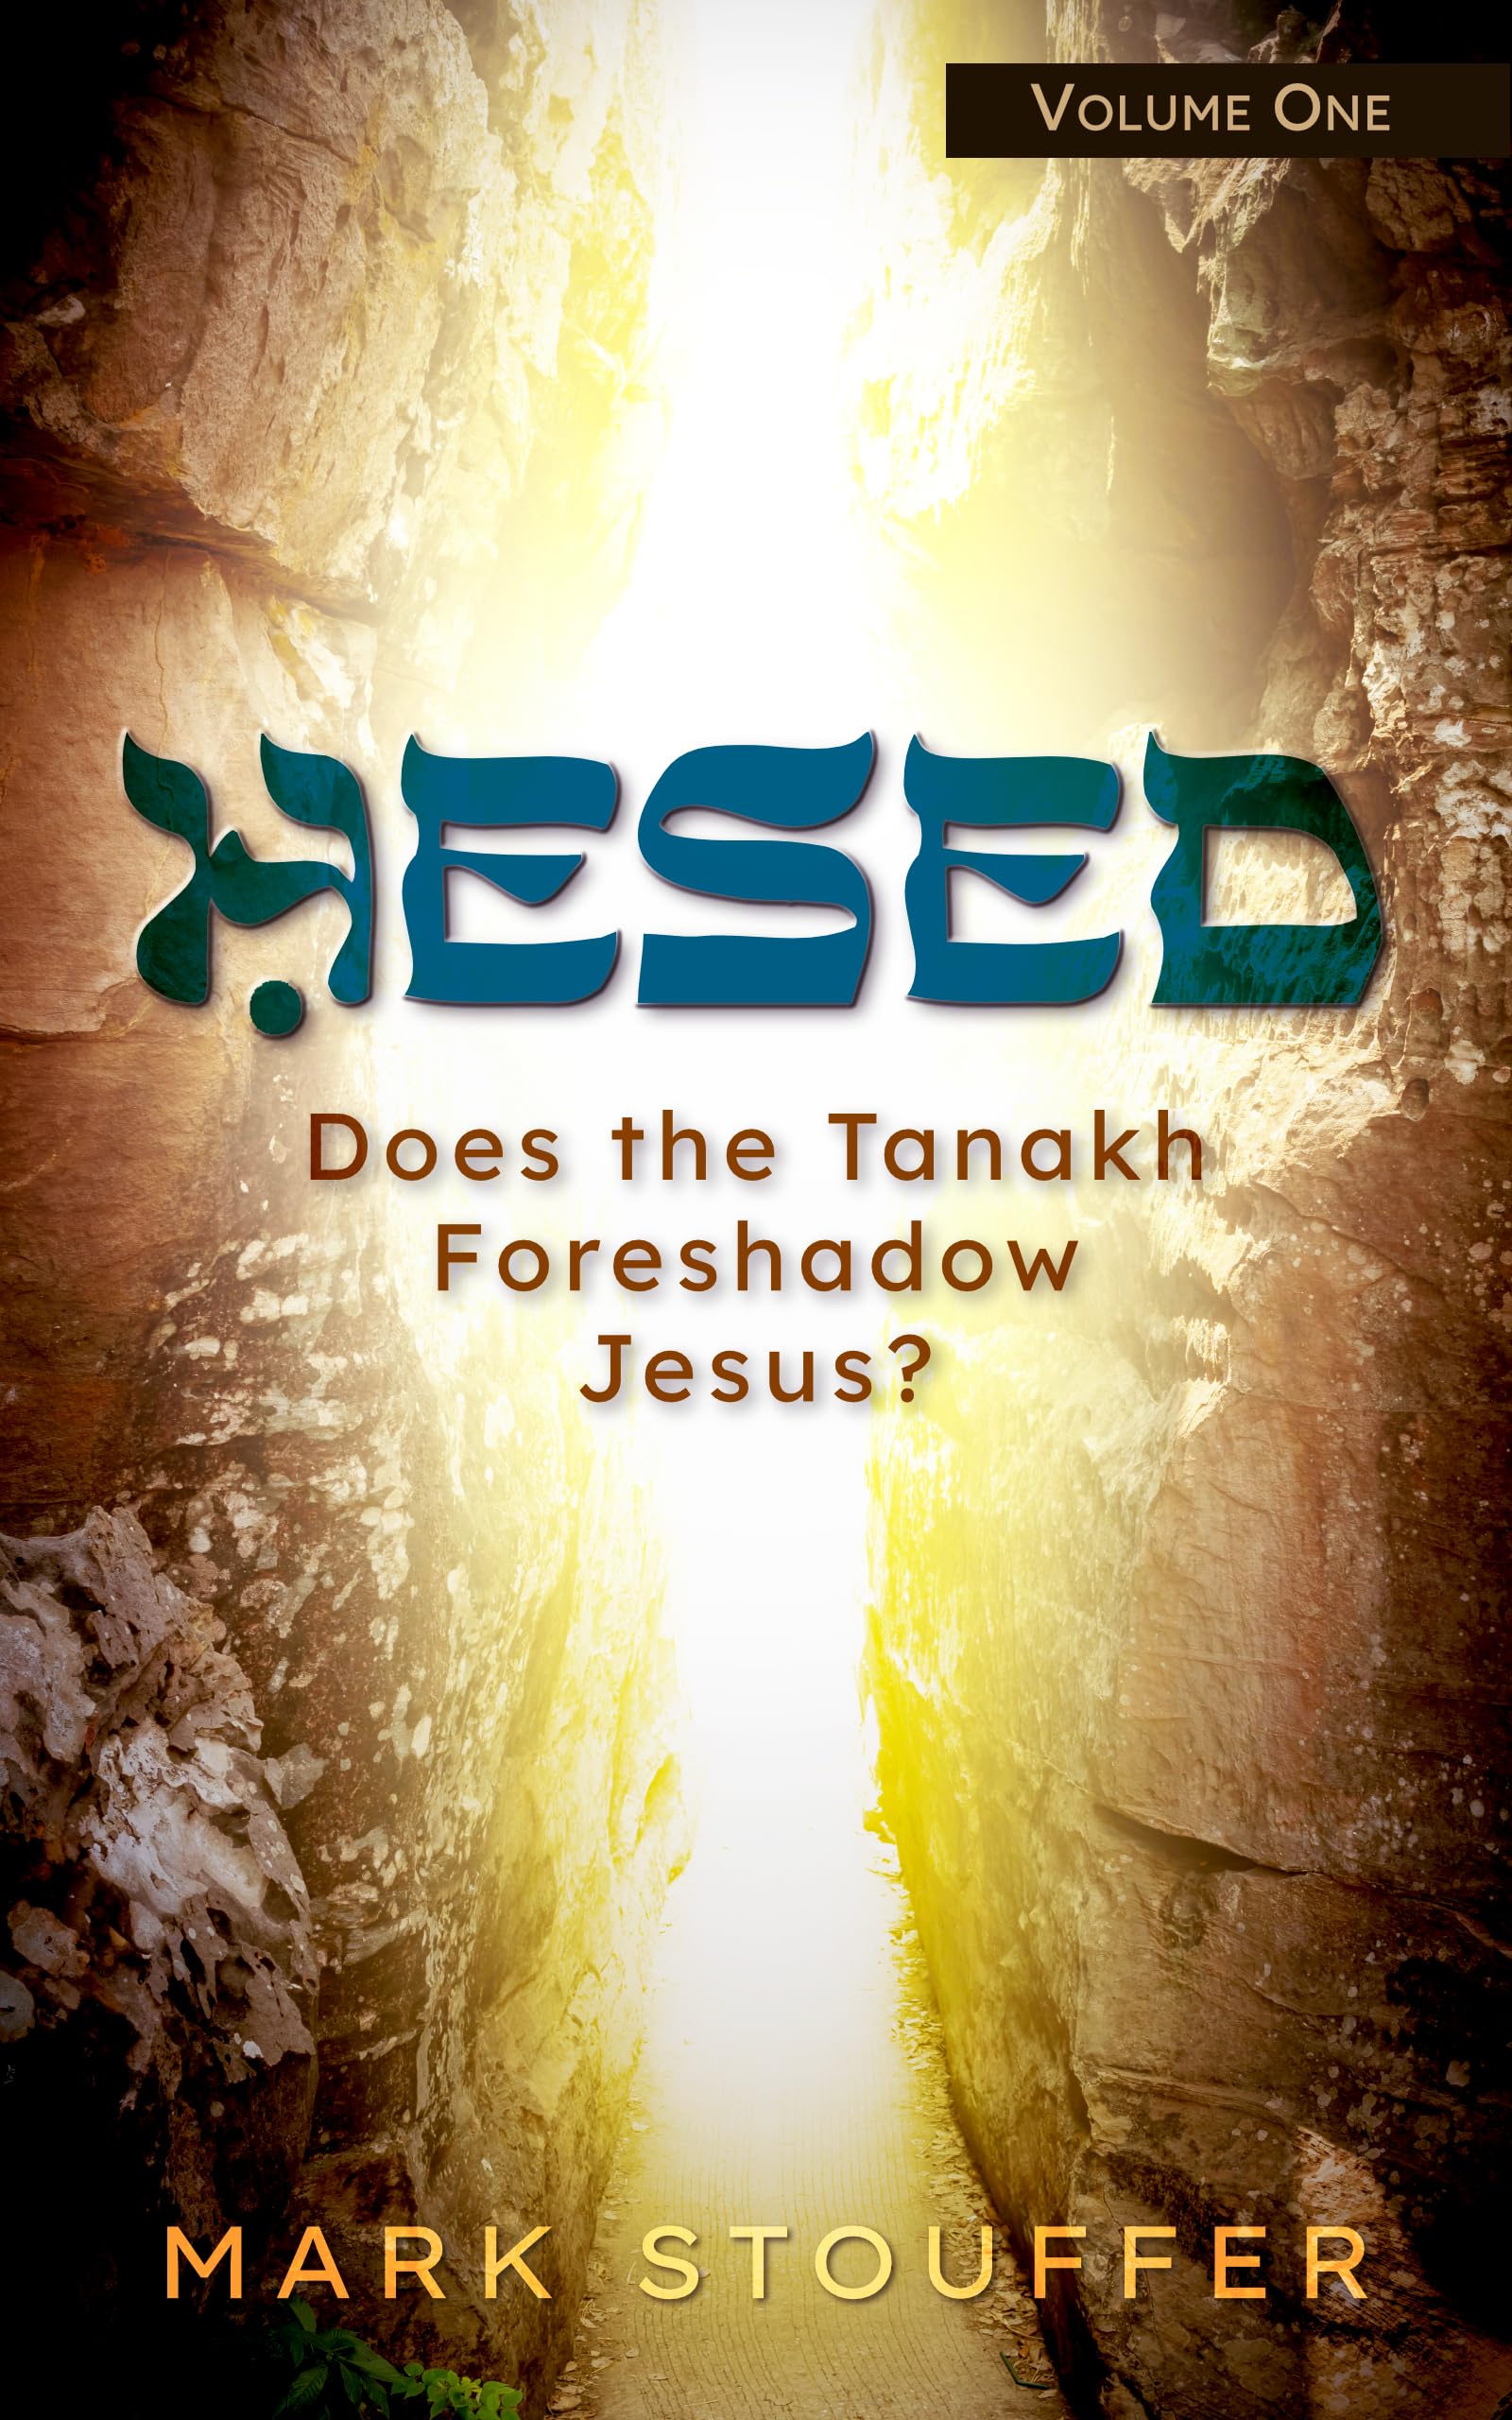 Hesed: Does the Tanakh Foreshadow Jesus? (Hesed (4 Volumes) Book 1)